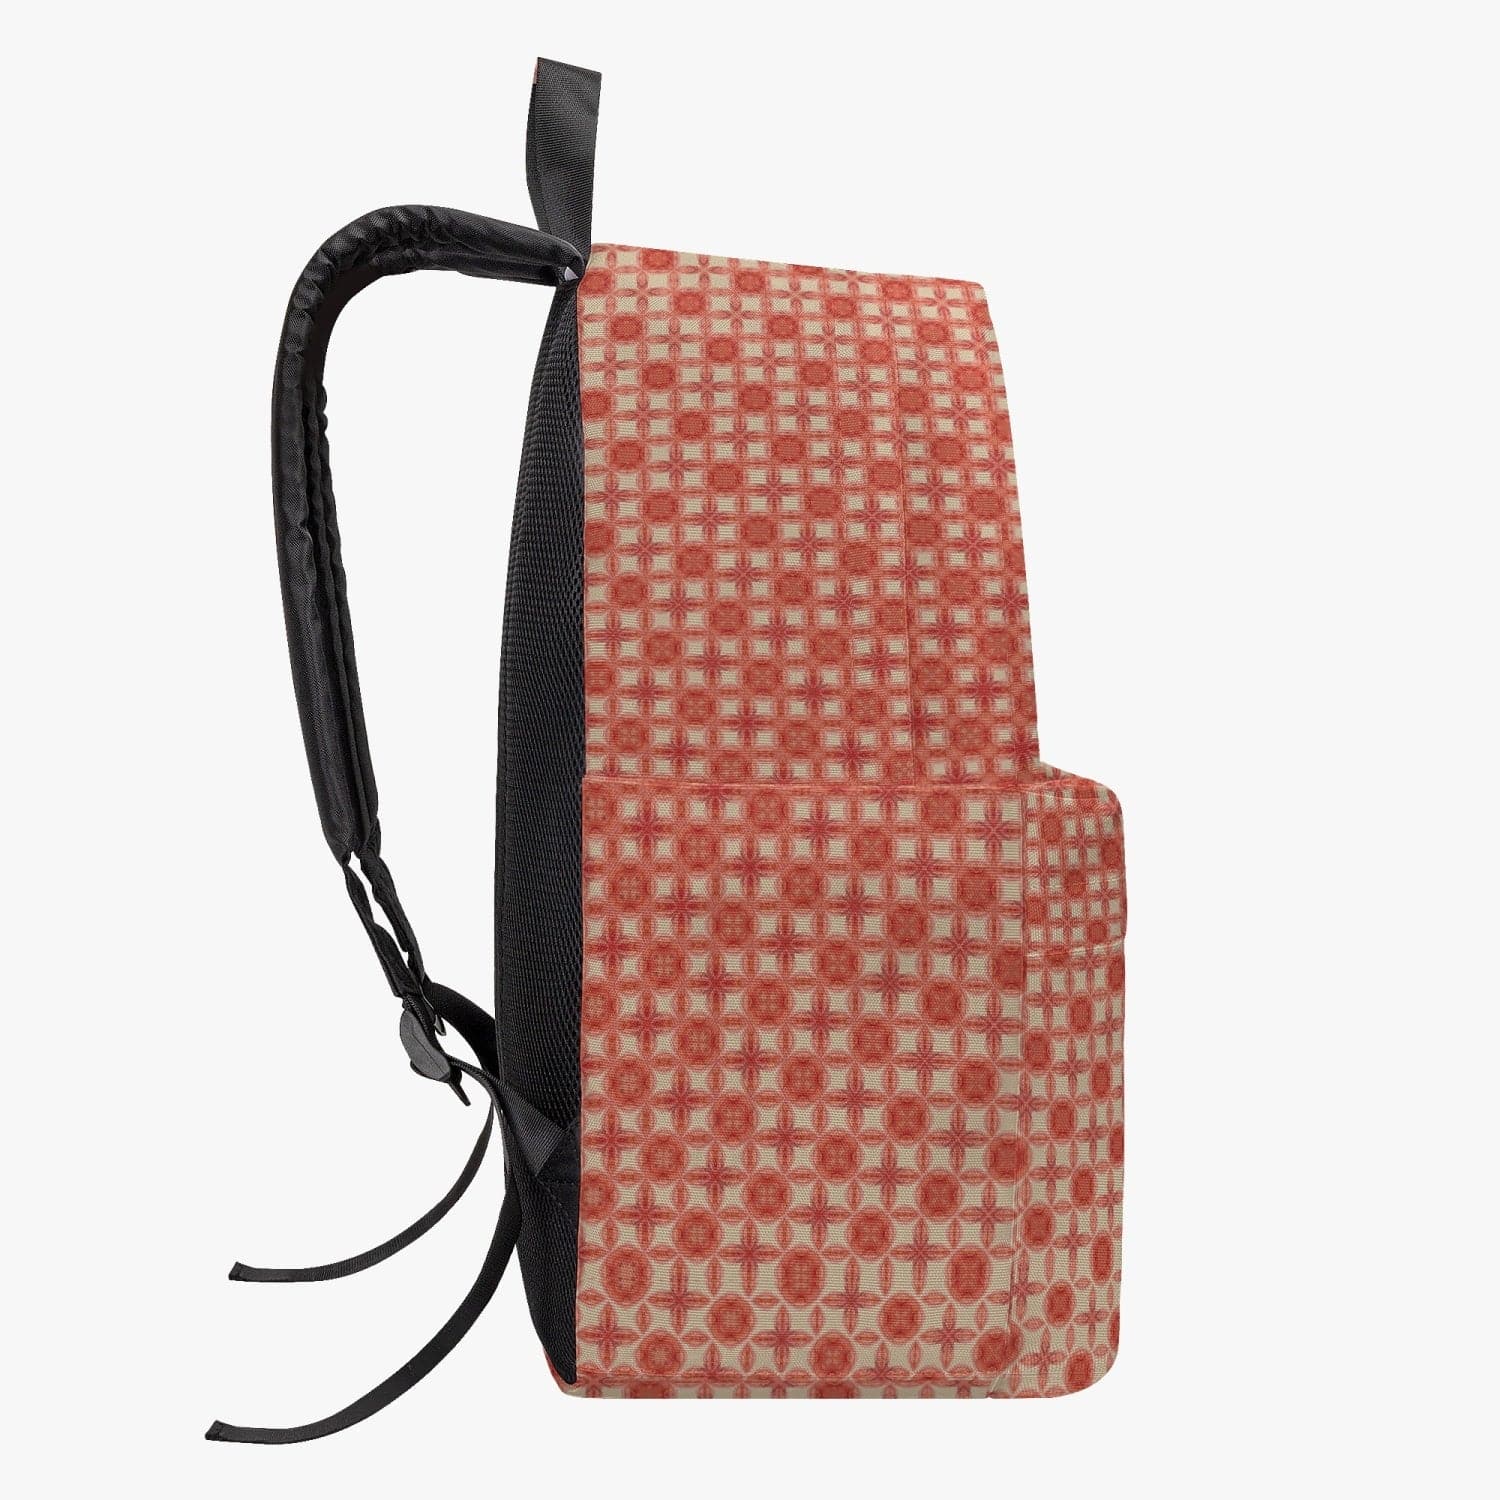 Red Buttercup fine patterned Cotton Canvas Backpack, by Sensus Studio Design